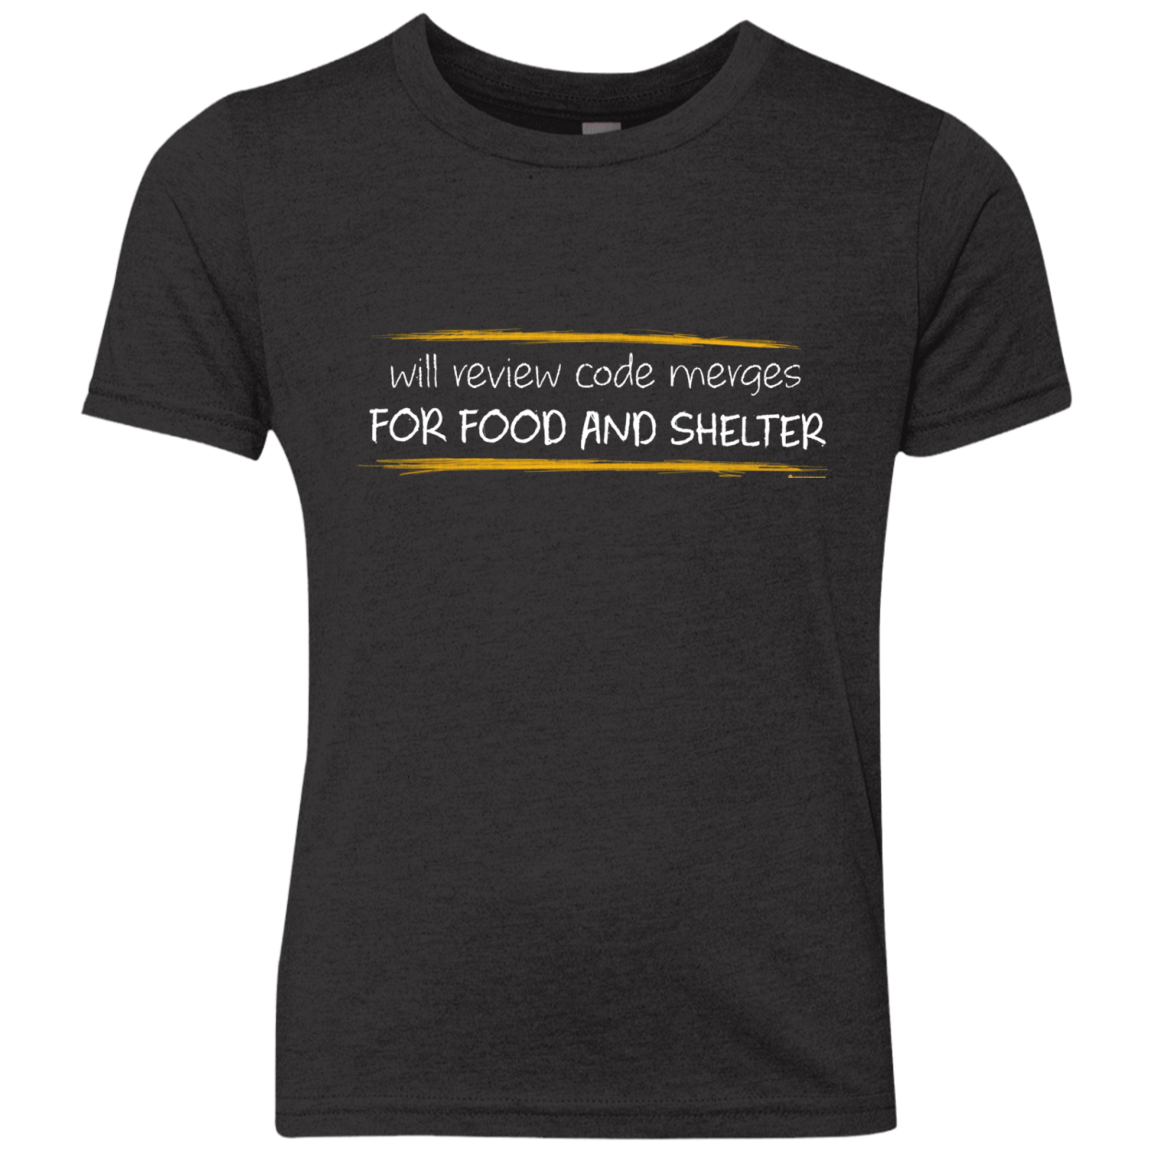 T-Shirts Vintage Black / YXS Reviewing Code For Food And Shelter Youth Triblend T-Shirt